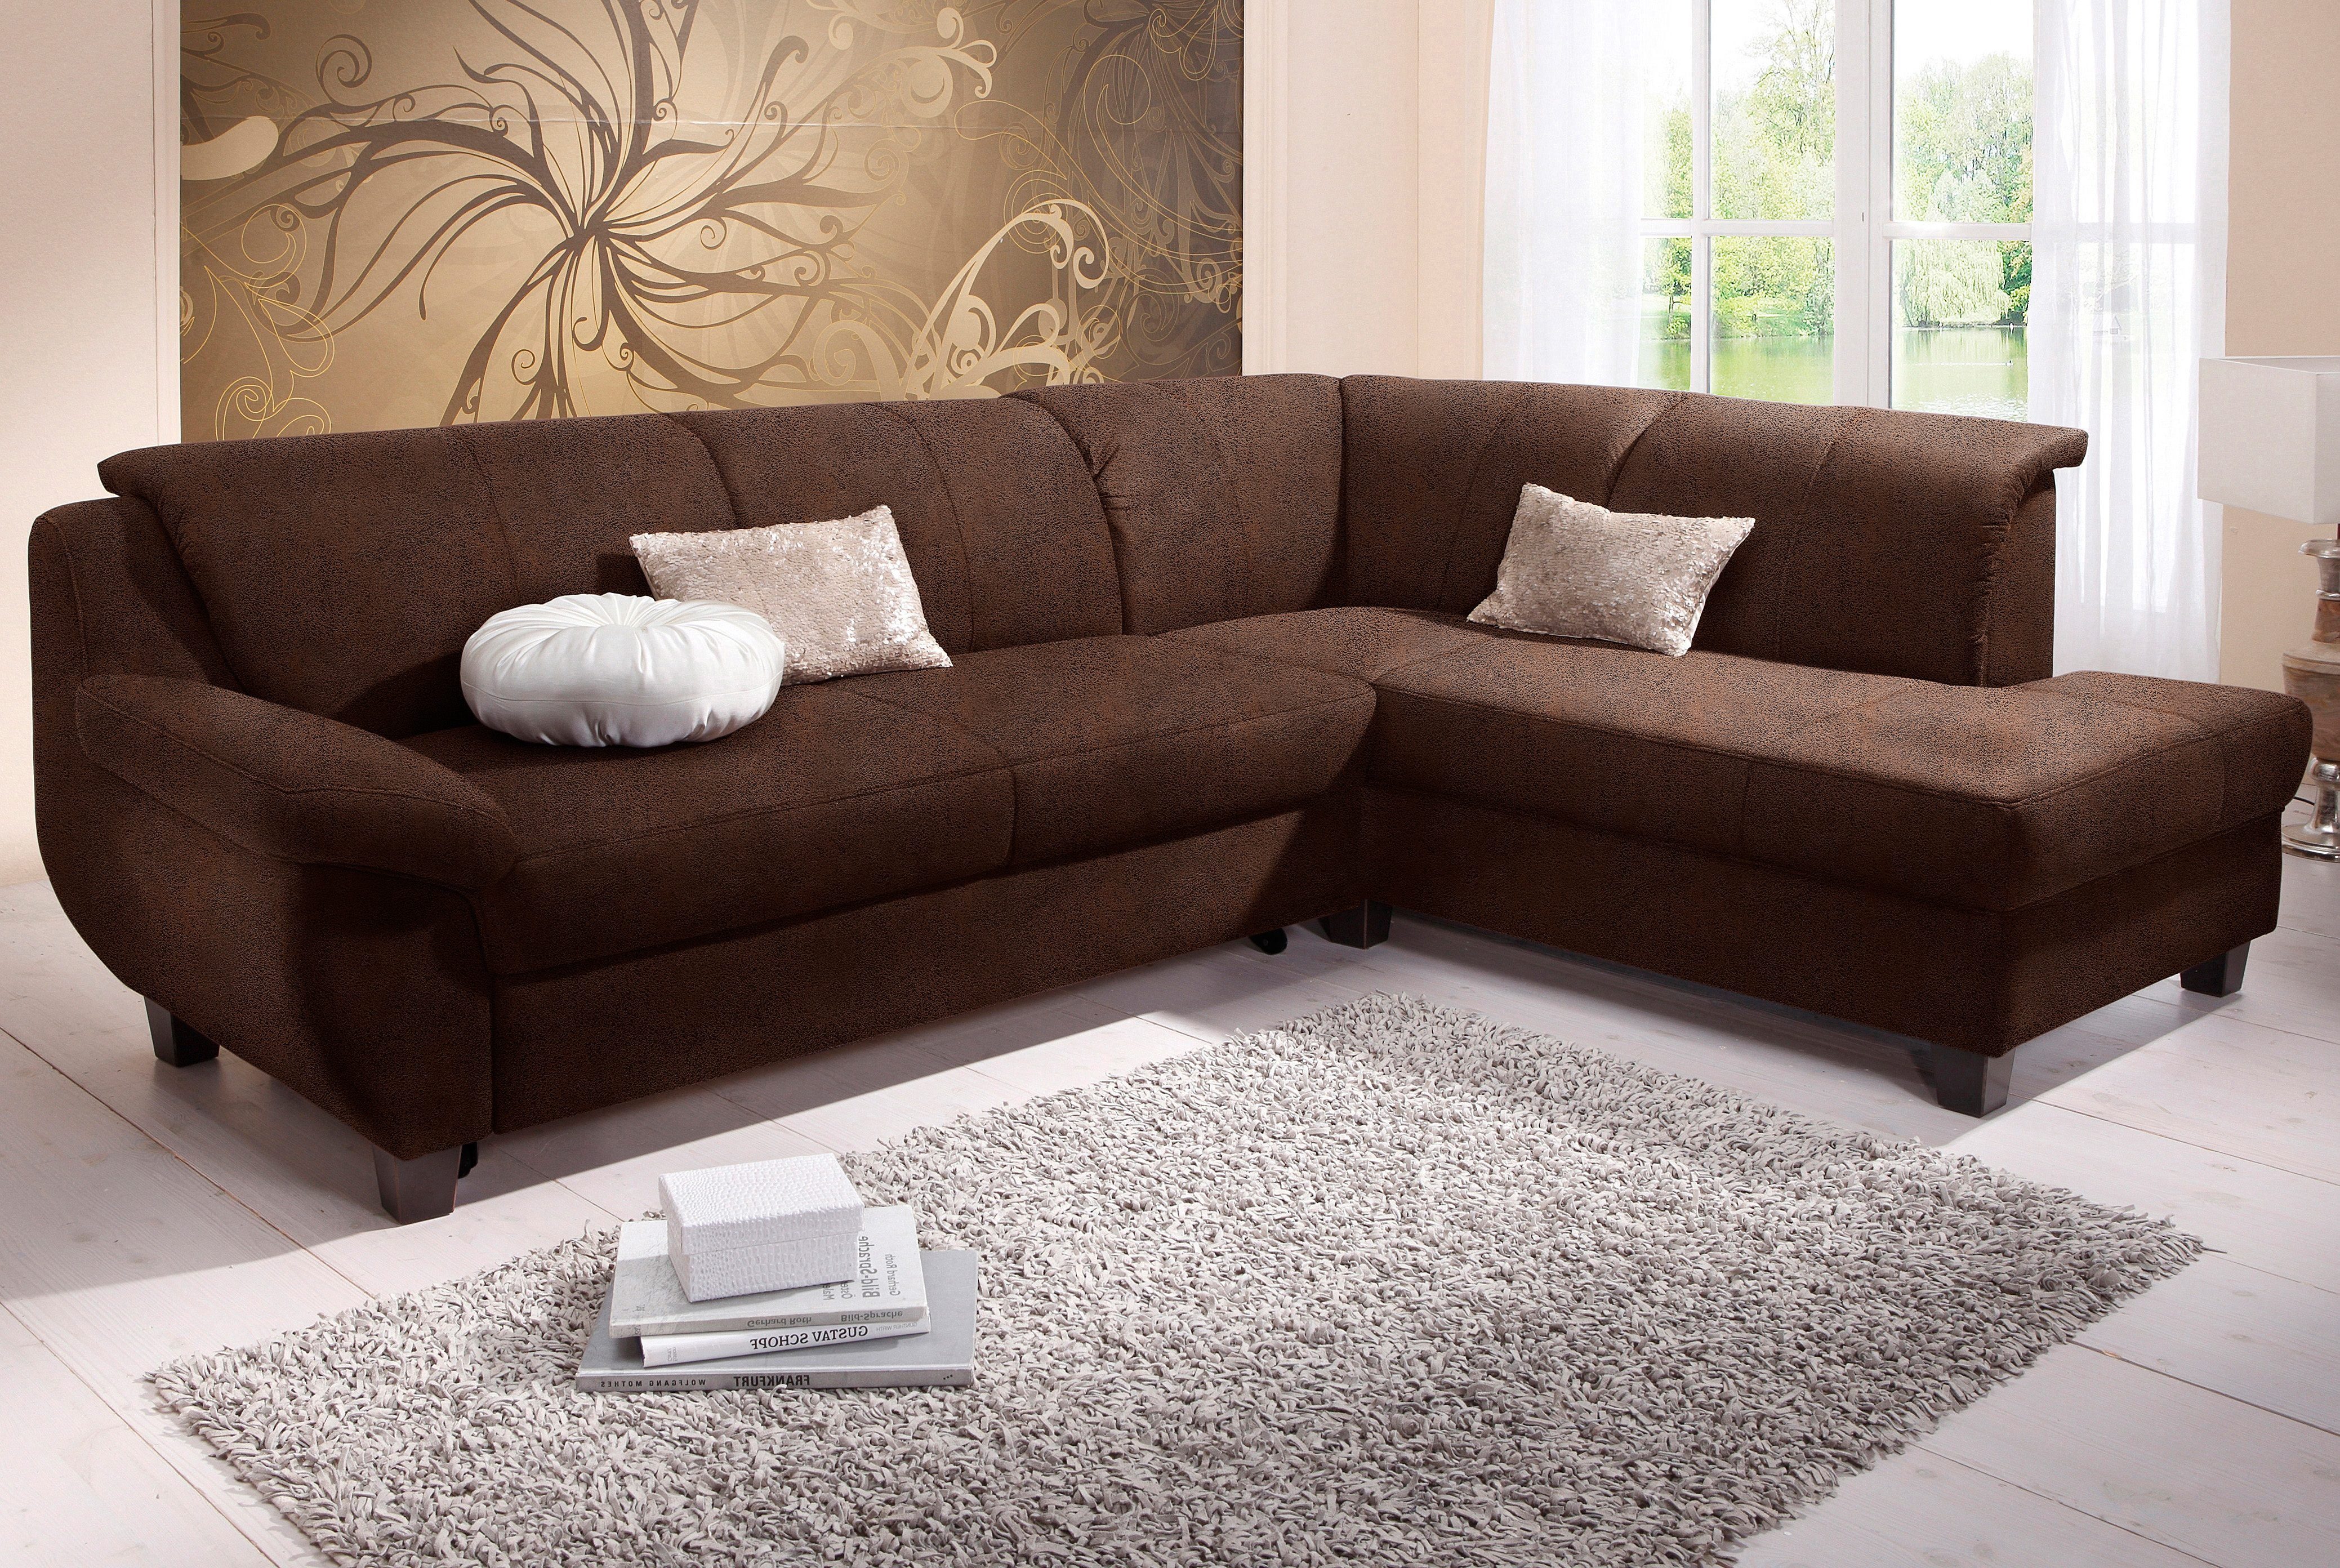 Ecksofa Cord Bettfunktion, affaire auch Yesterday, in Home wahlweise mit